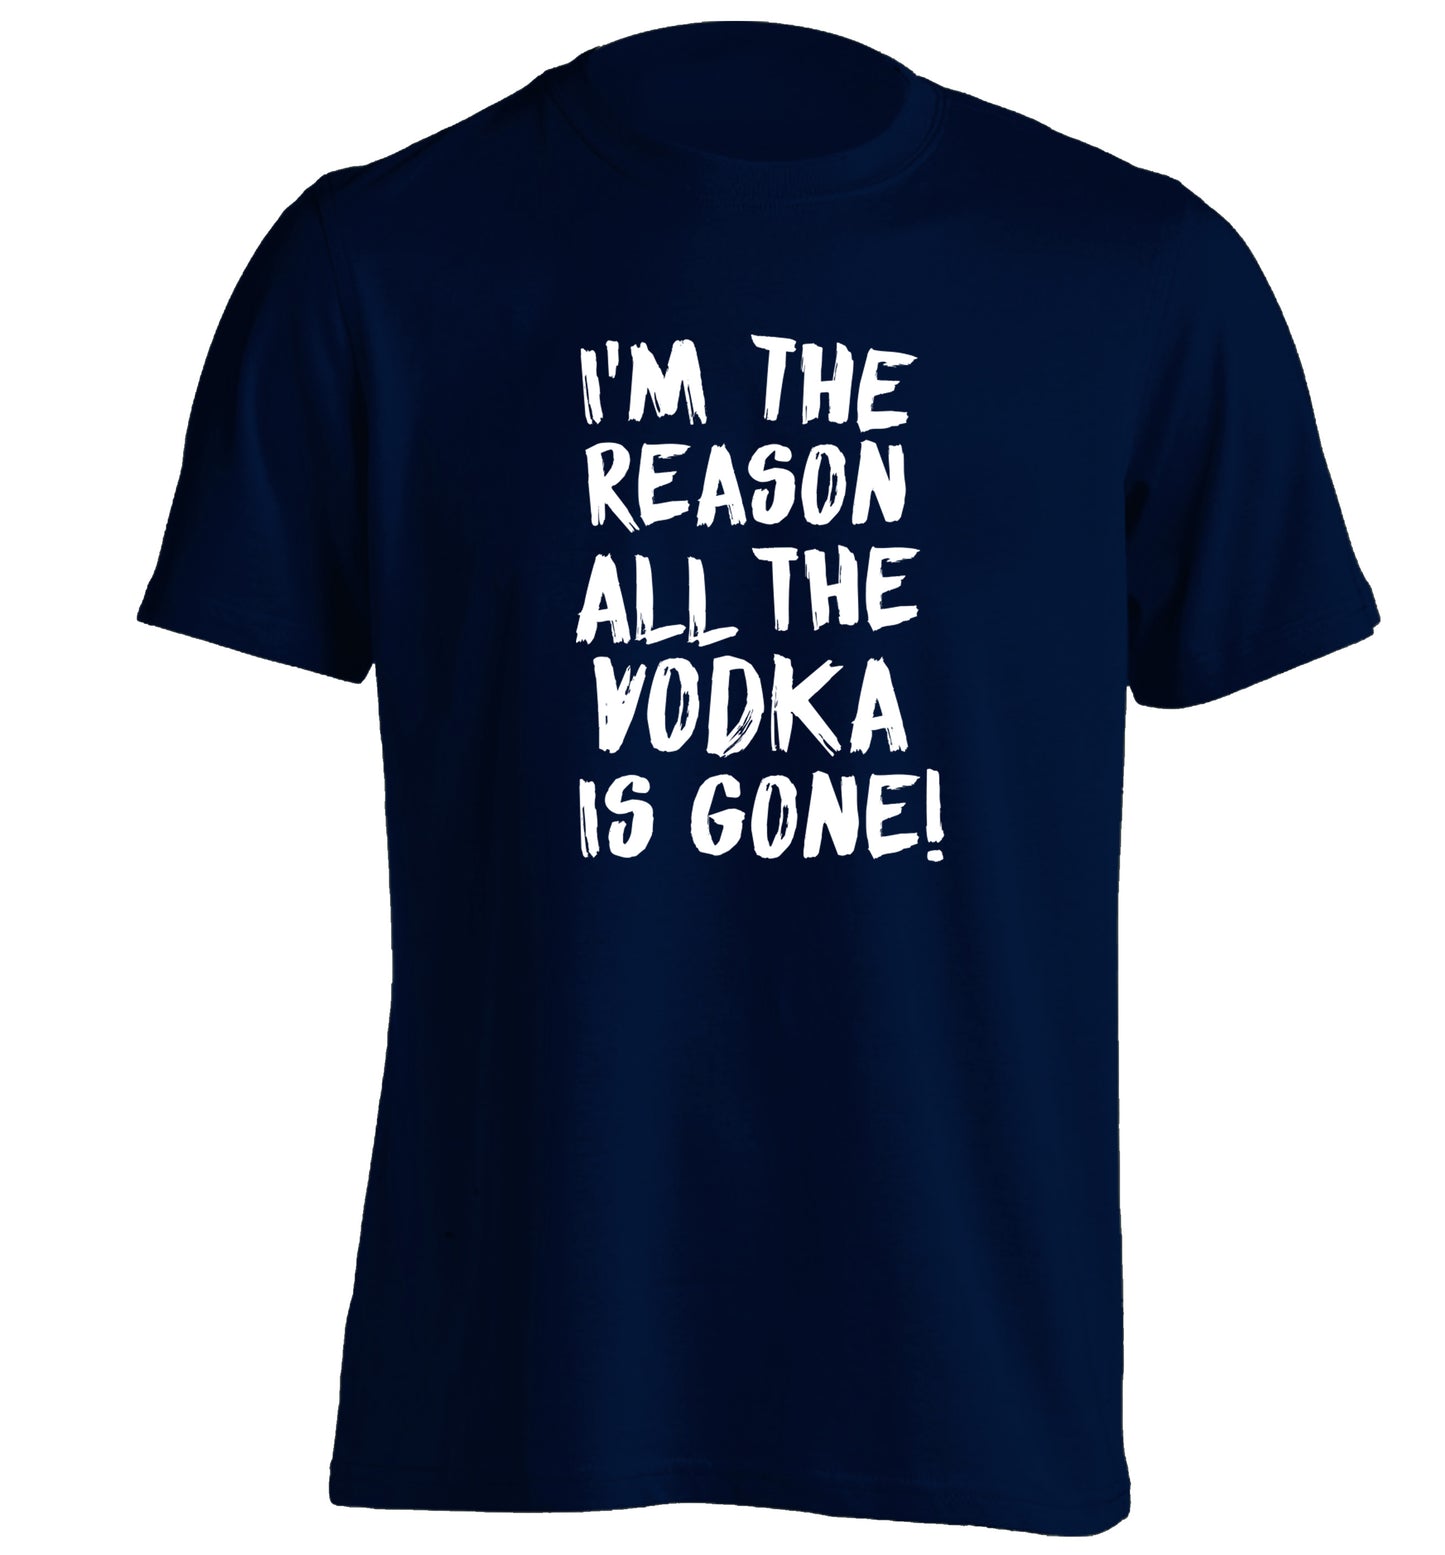 I'm the reason all the tequila is gone adults unisex navy Tshirt 2XL